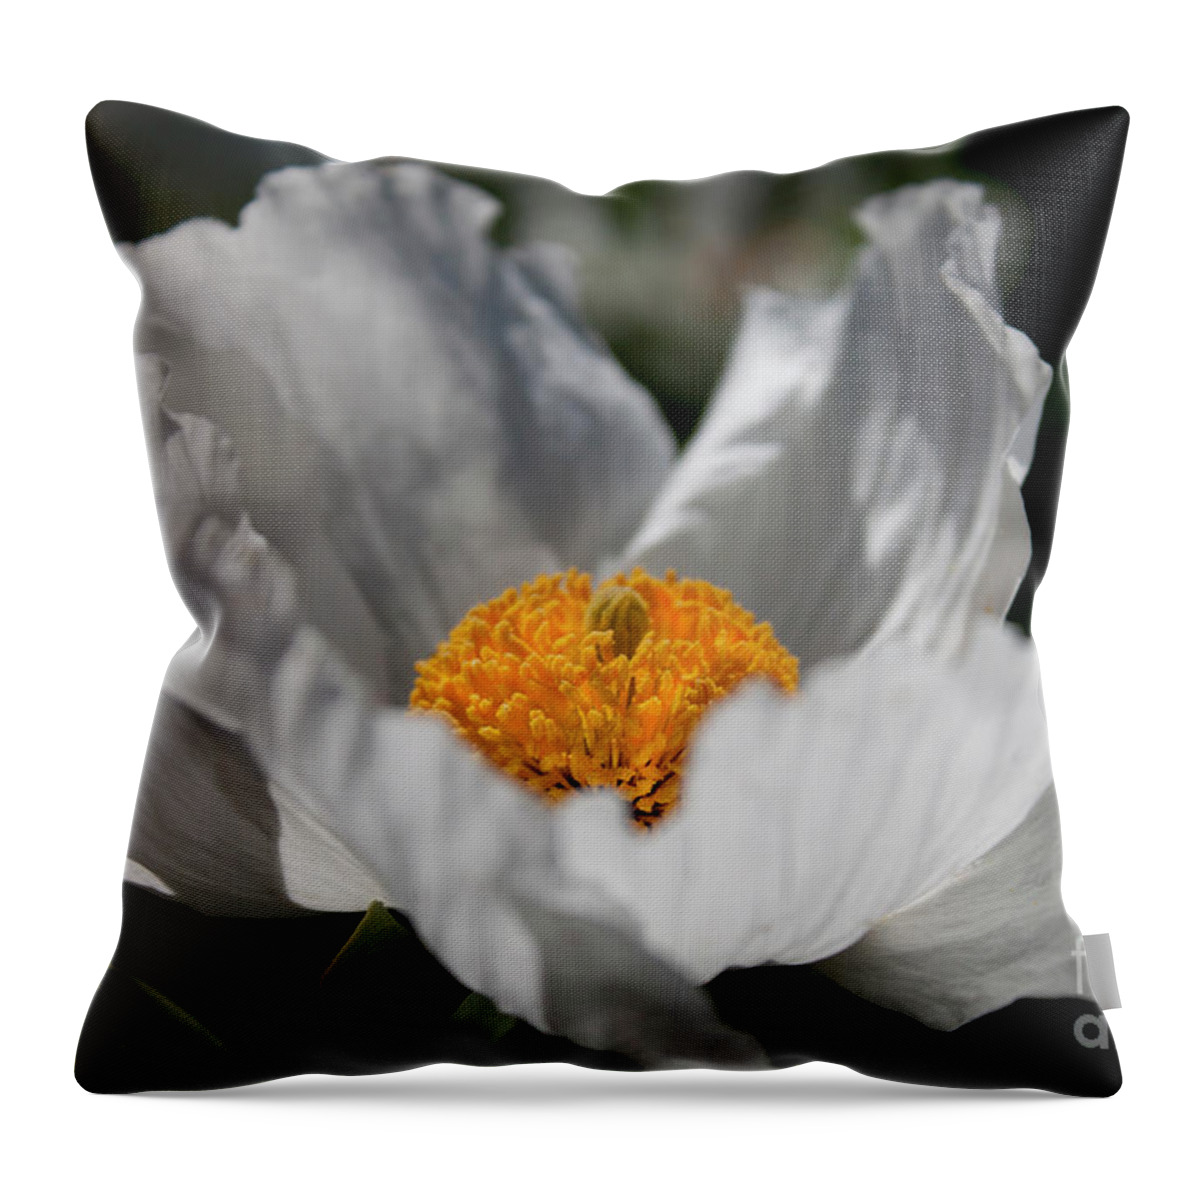 Matilija Poppy Flower.flowers Throw Pillow featuring the photograph Matilija Poppy by Ivete Basso Photography